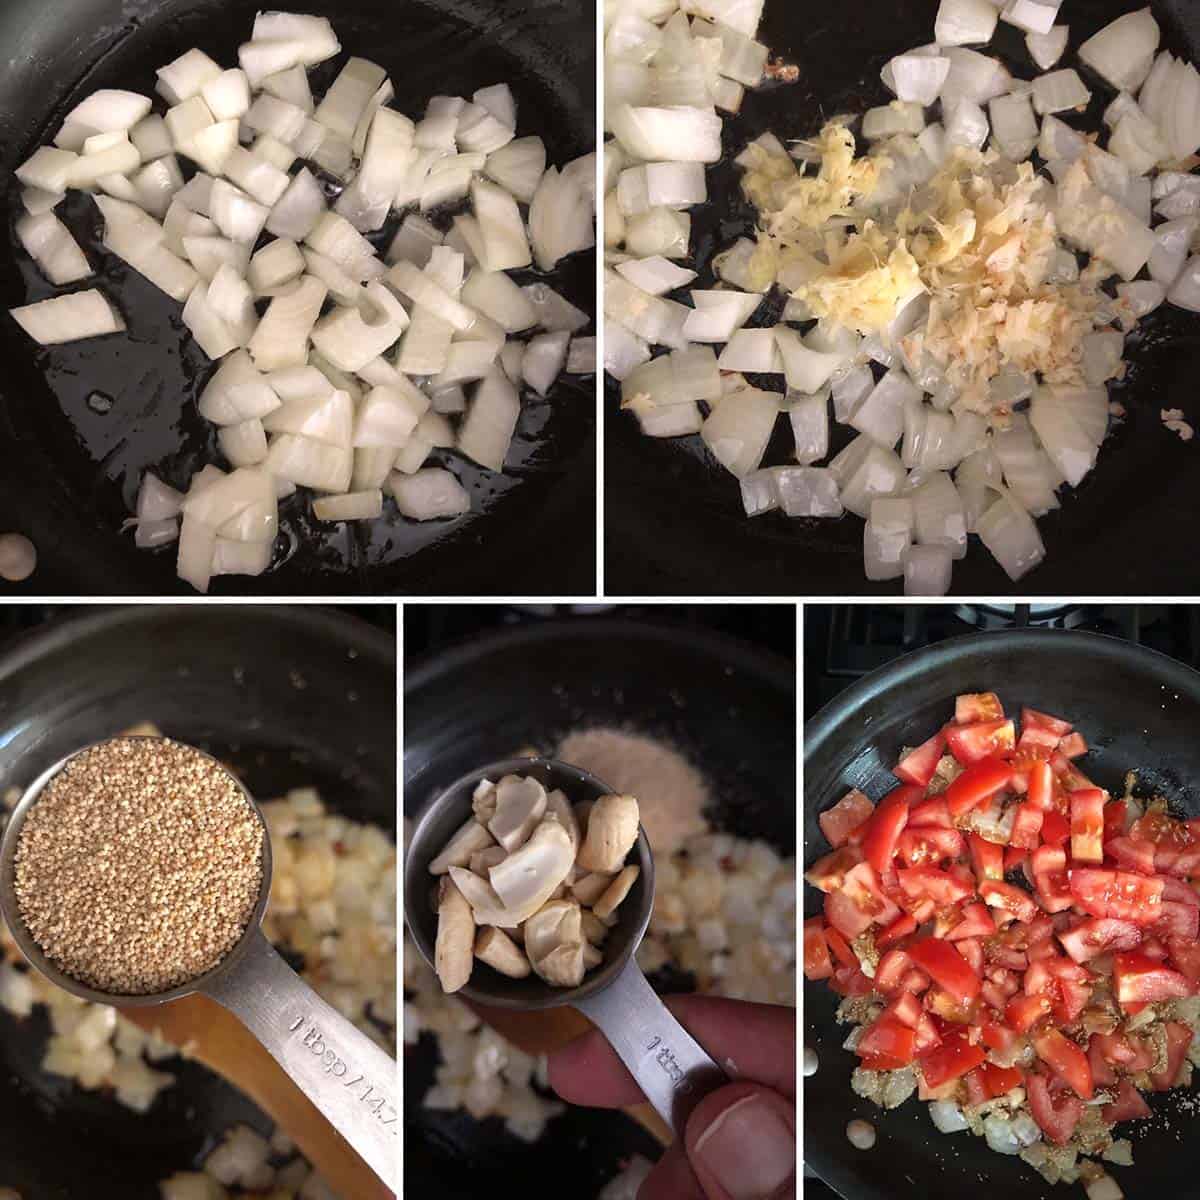 Step by step photos showing the making of salna/ gravy - cooked onions, ginger, garlic, poppy seeds, cashews and tomatoes